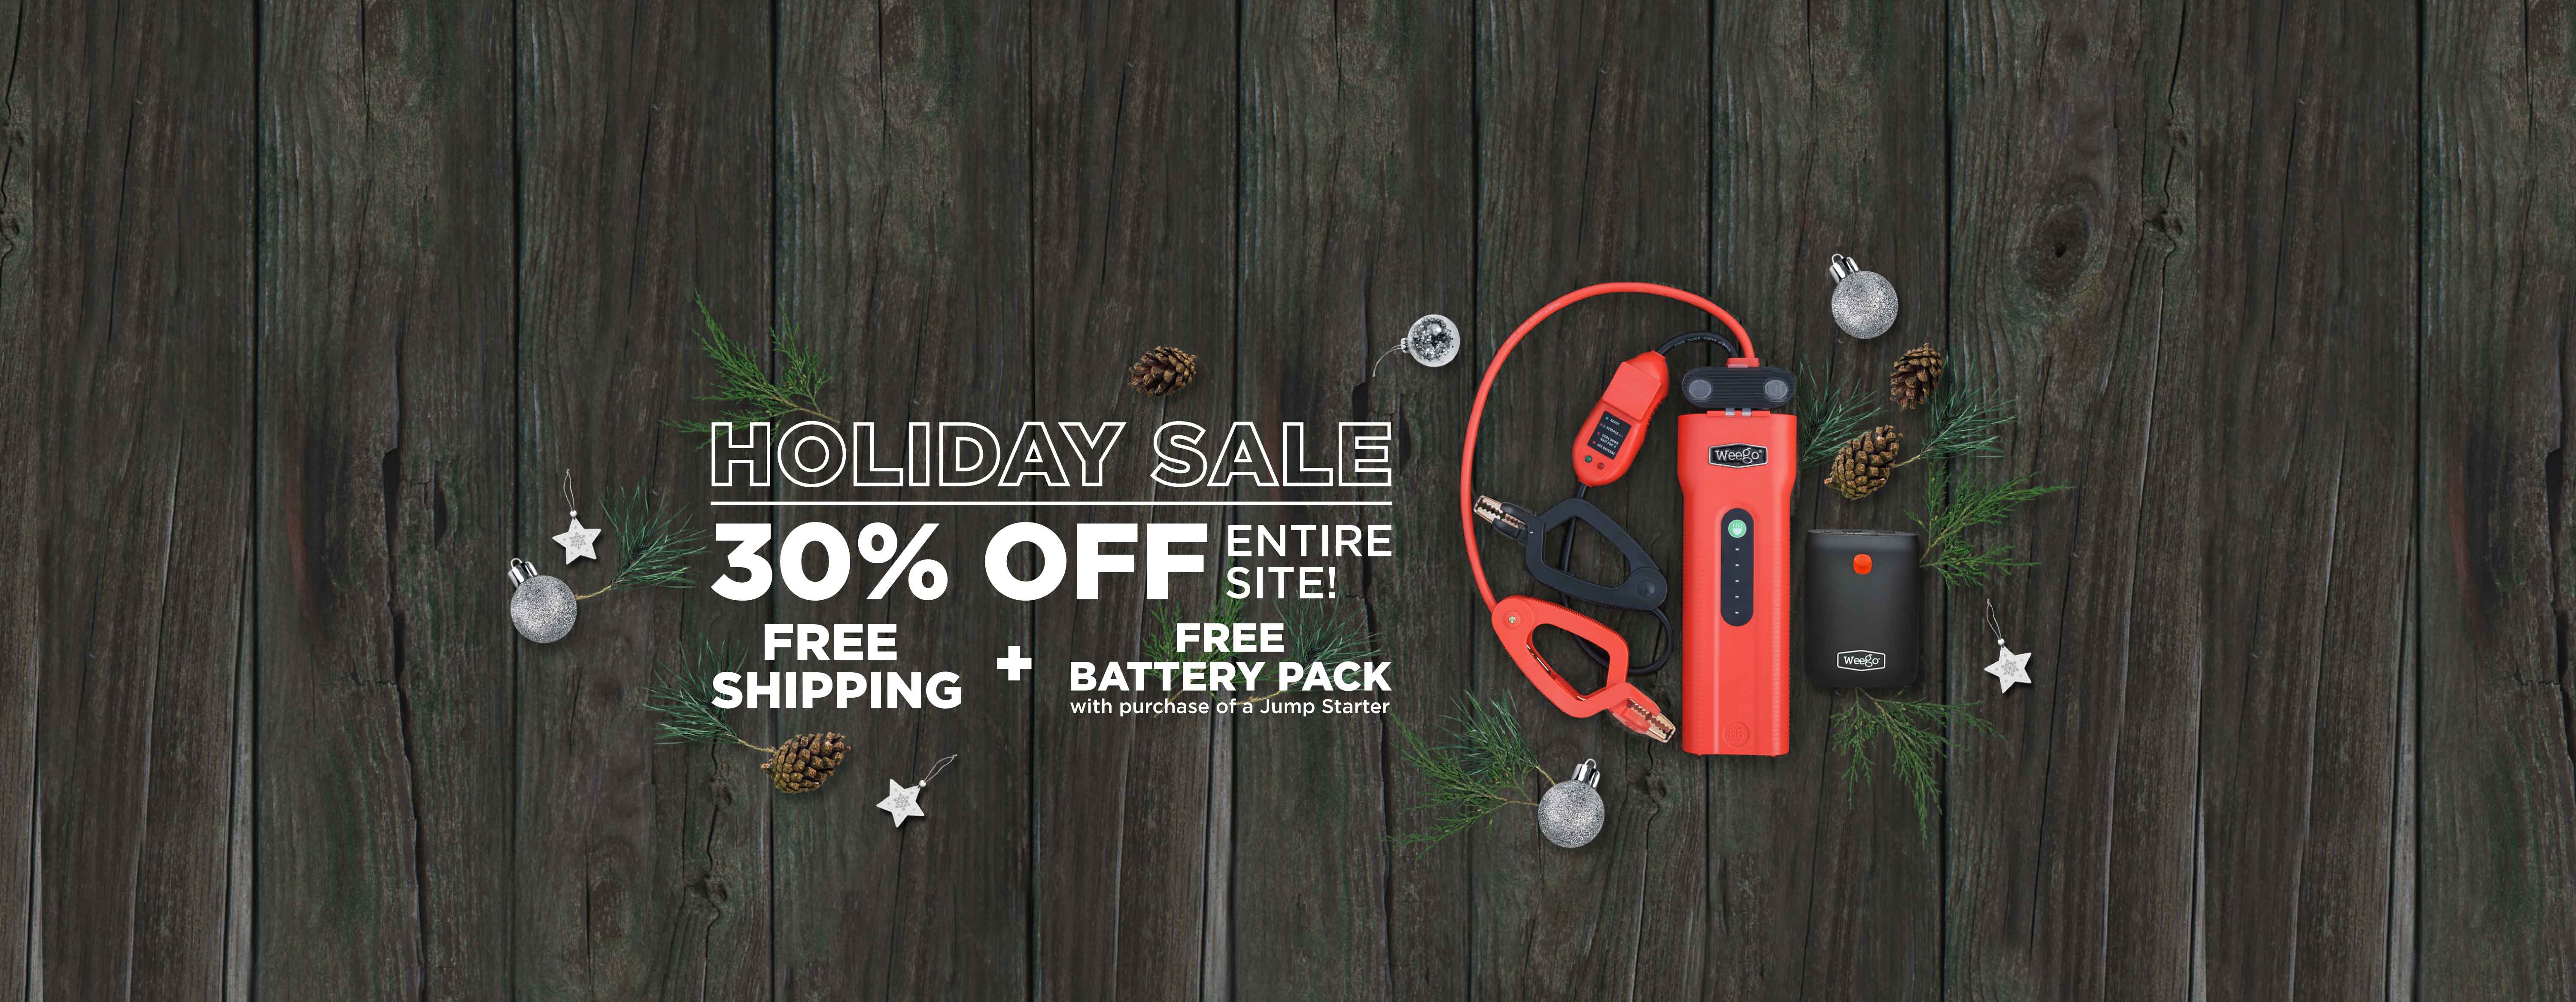 Weego Jump Starters - 30% OFF + Free Battery Pack + Free Shipping